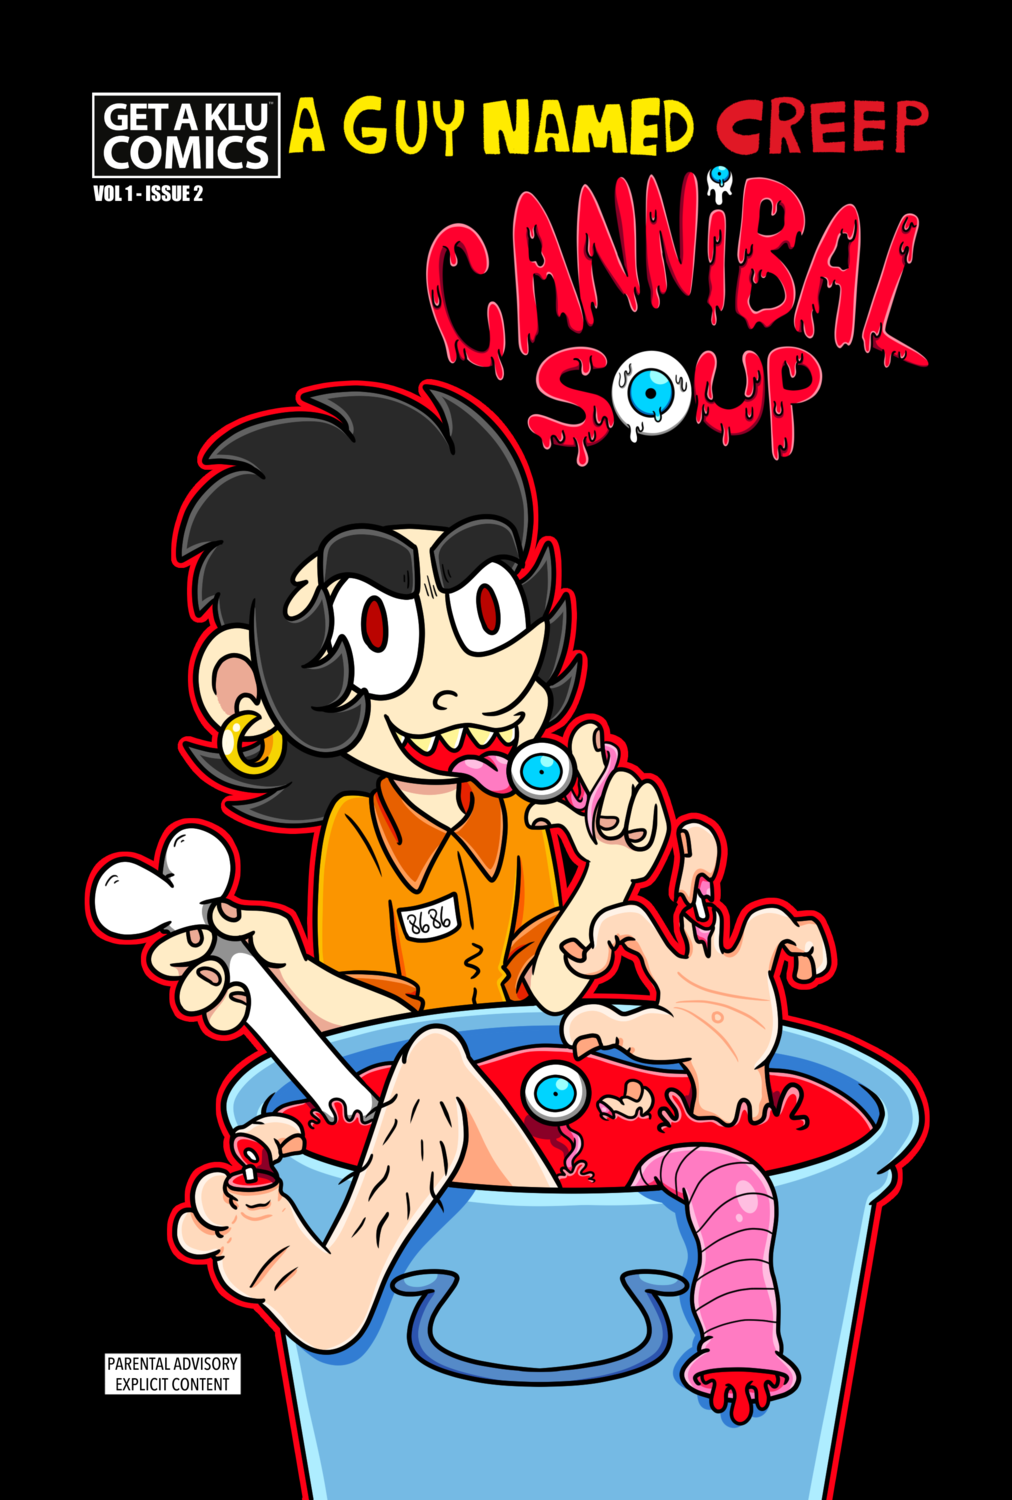 CREEP Cannibal Soup Comic Book Issue 2